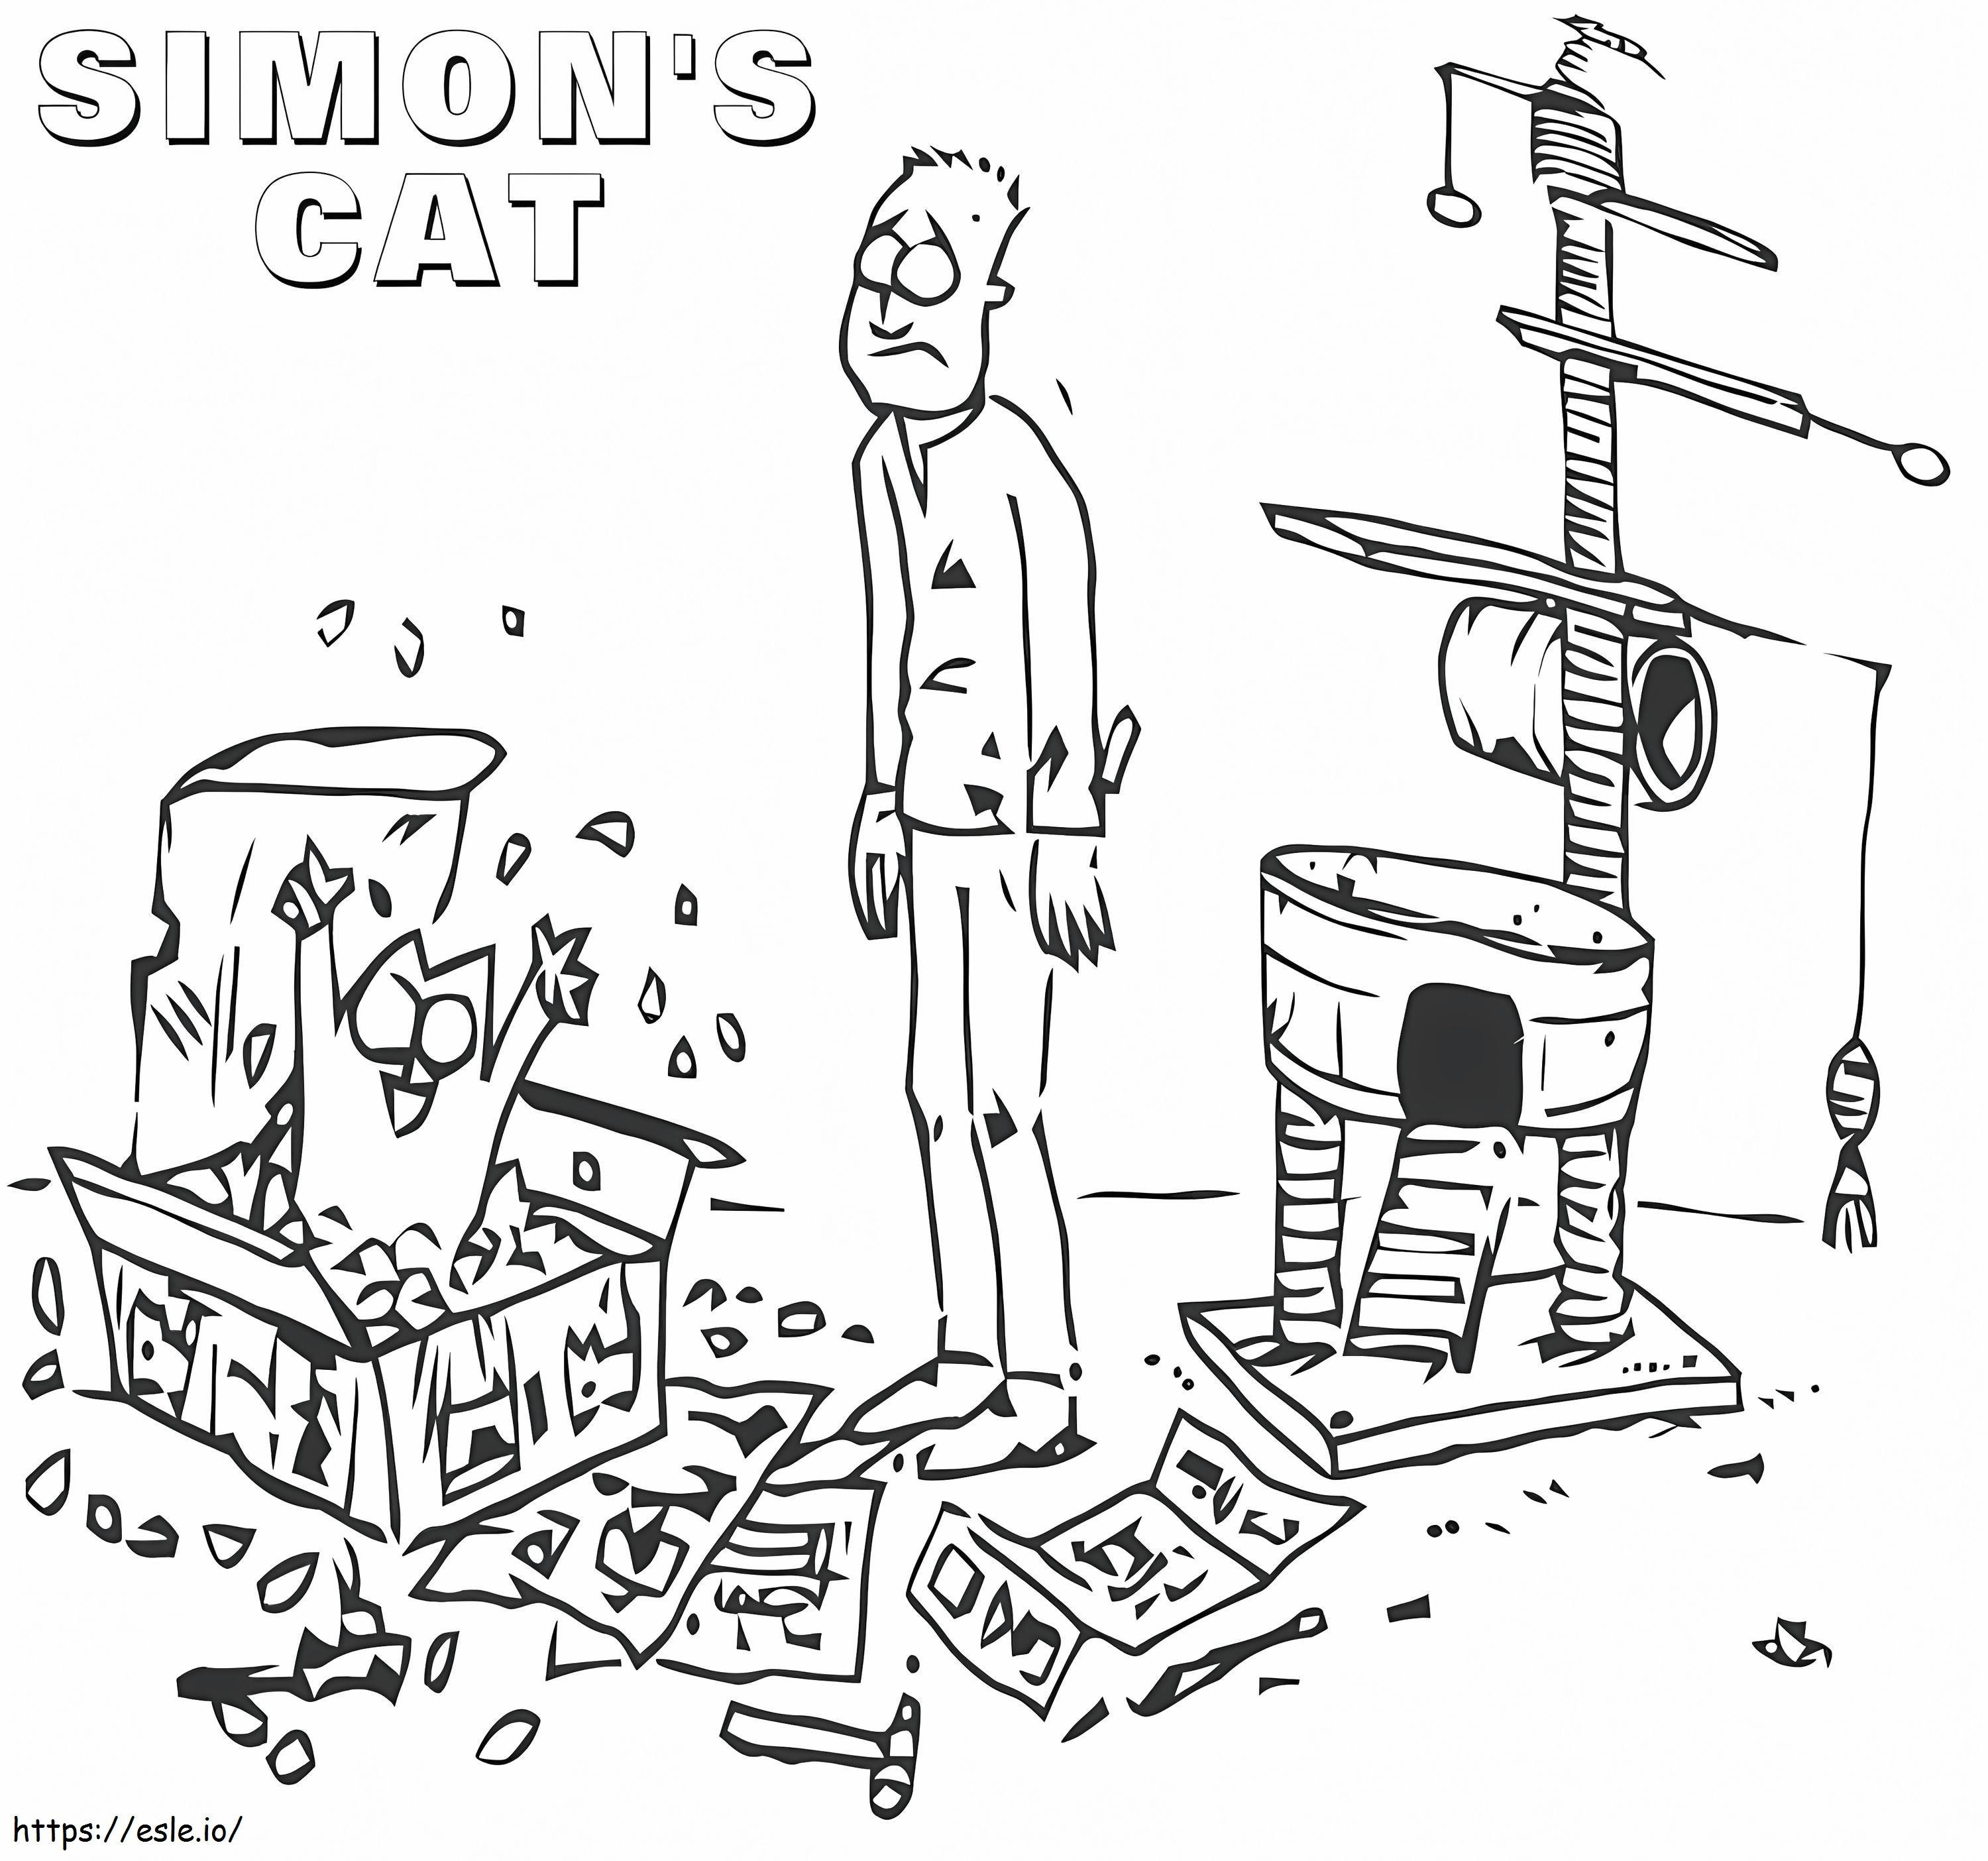 Simons Cat 1 coloring page